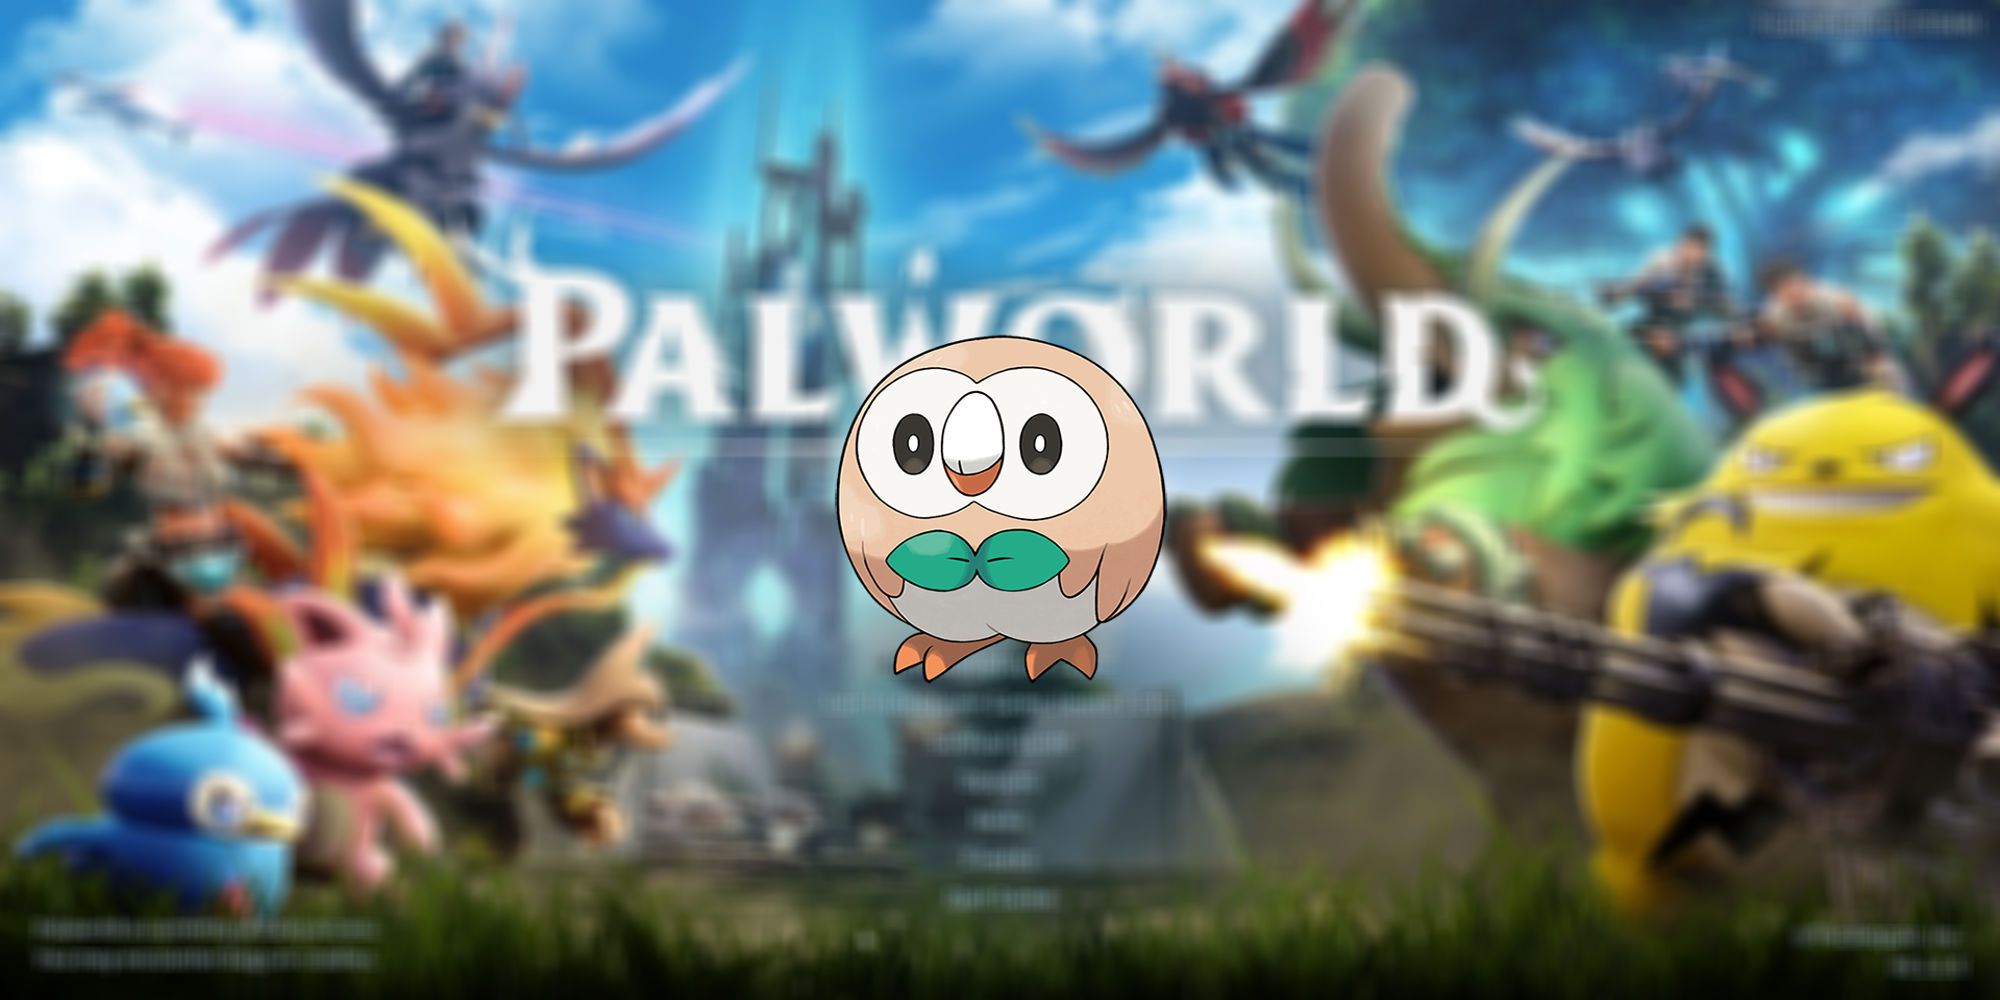 Rowlet from Pokemon potentially fitting in Palworld